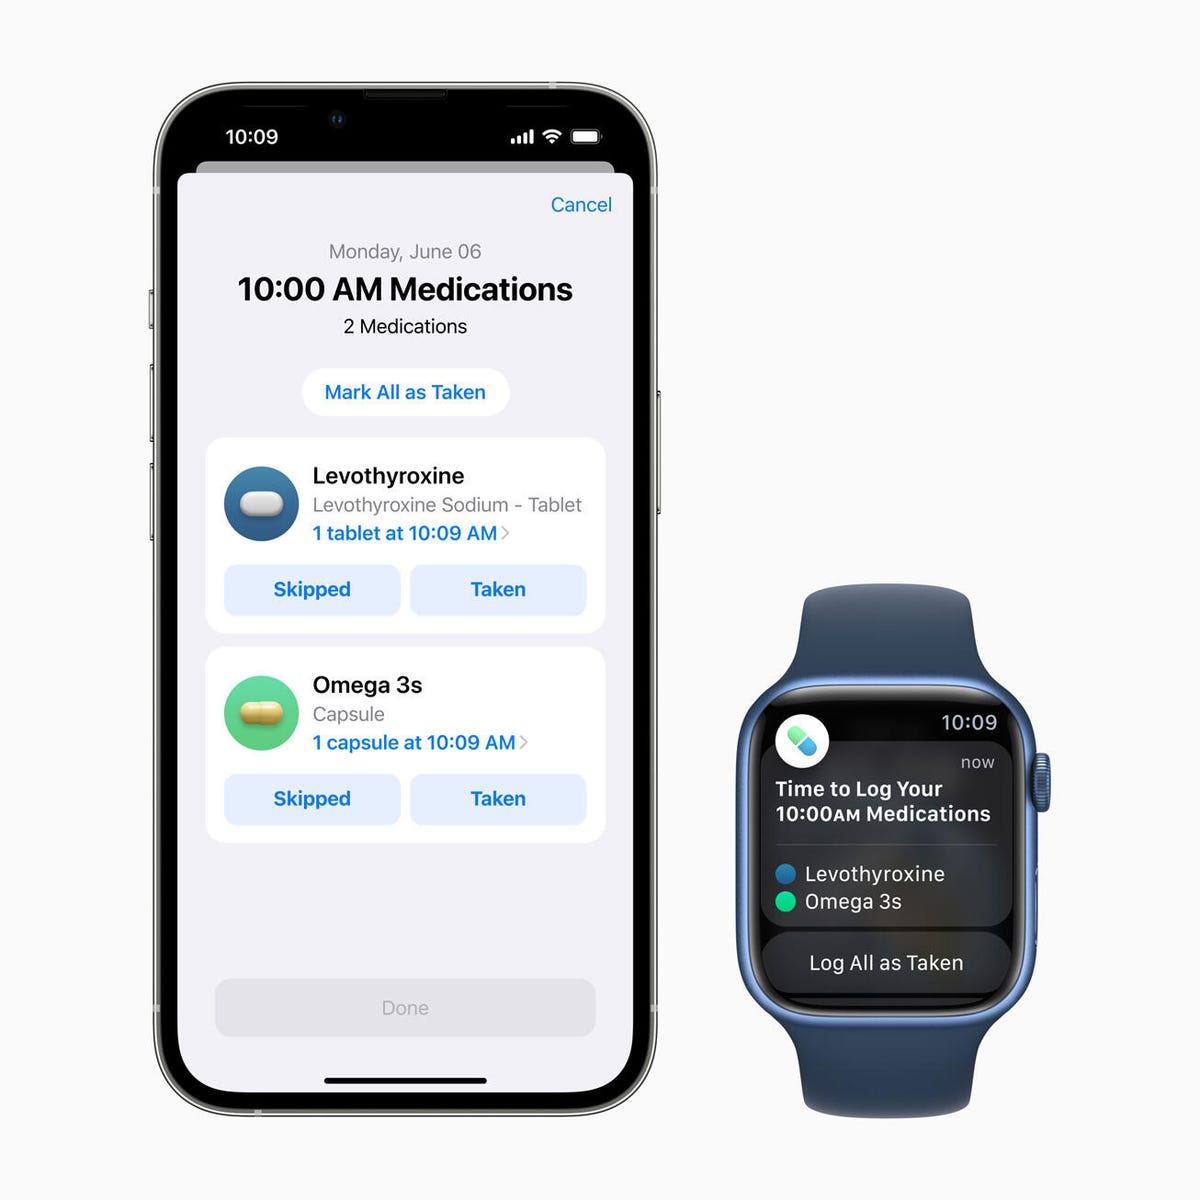 Apple's Medication tracker on the iPhone and Apple Watch.